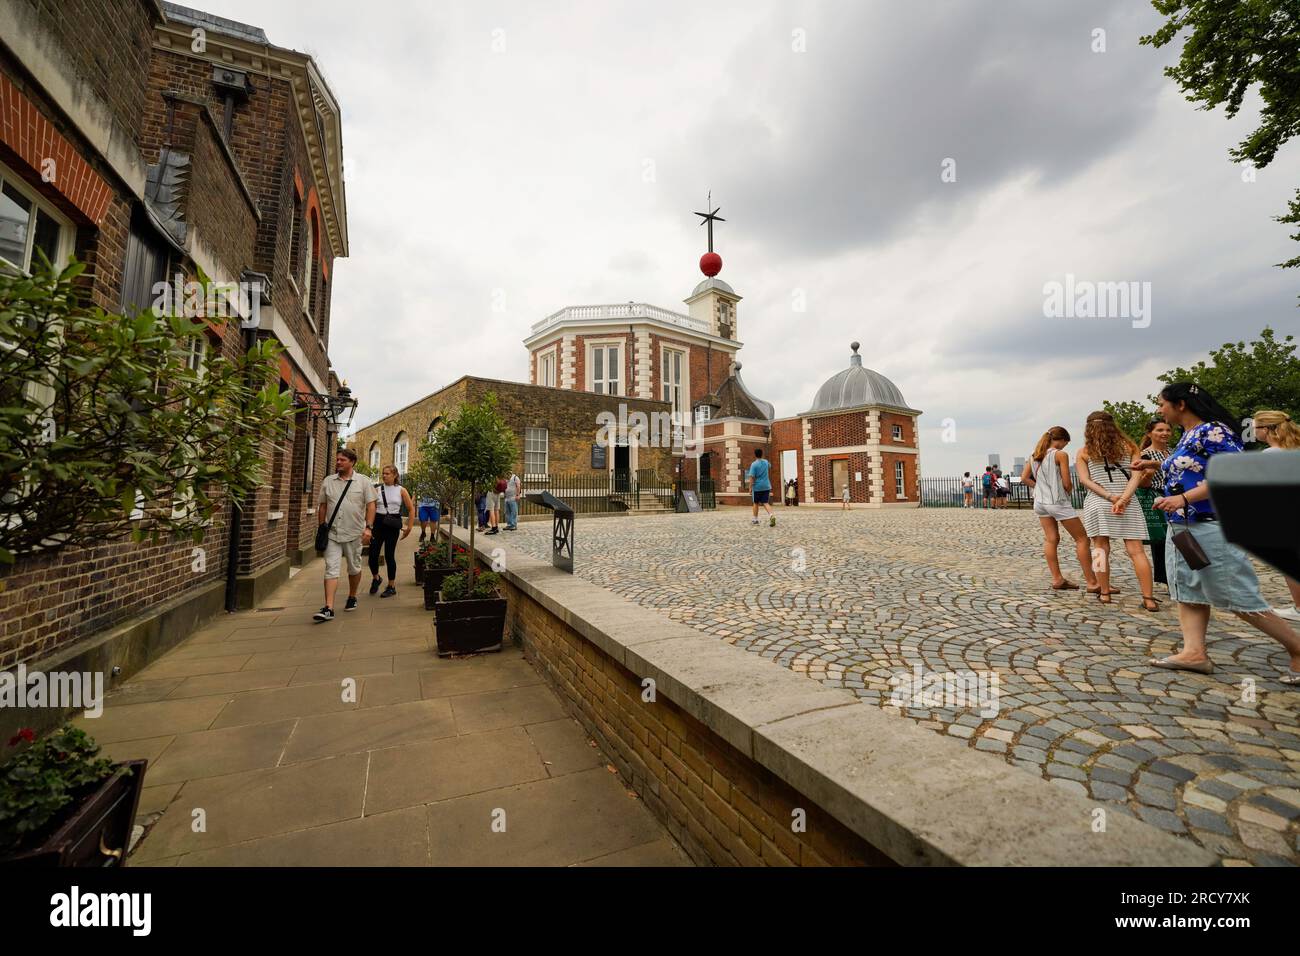 Royal Observatory Greenwich, London. See the Flamsteed House, Octagon Room, Great Equatorial Telescope, Time Ball and stand on the Prime Meridian Line Stock Photo